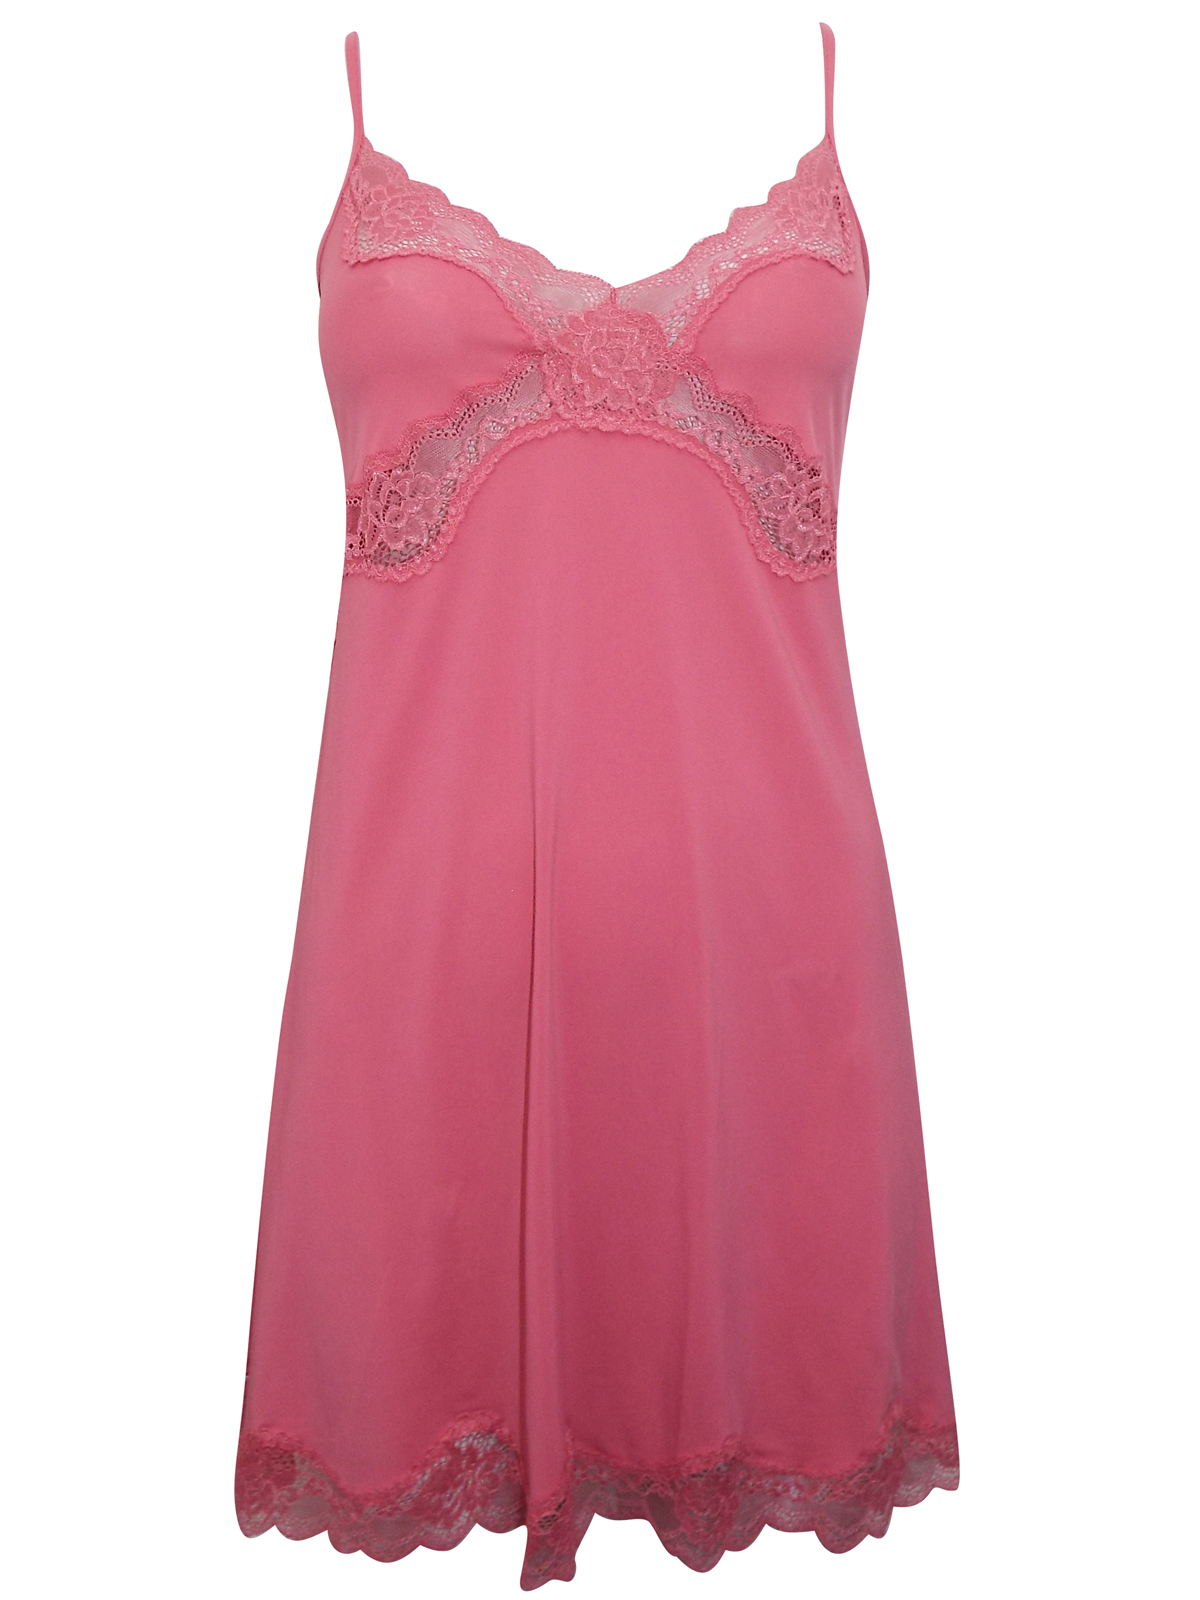 Marks and Spencer - - M&5 BRIGHT-ROSE Slinky Lace Full Trim Slip - Size ...